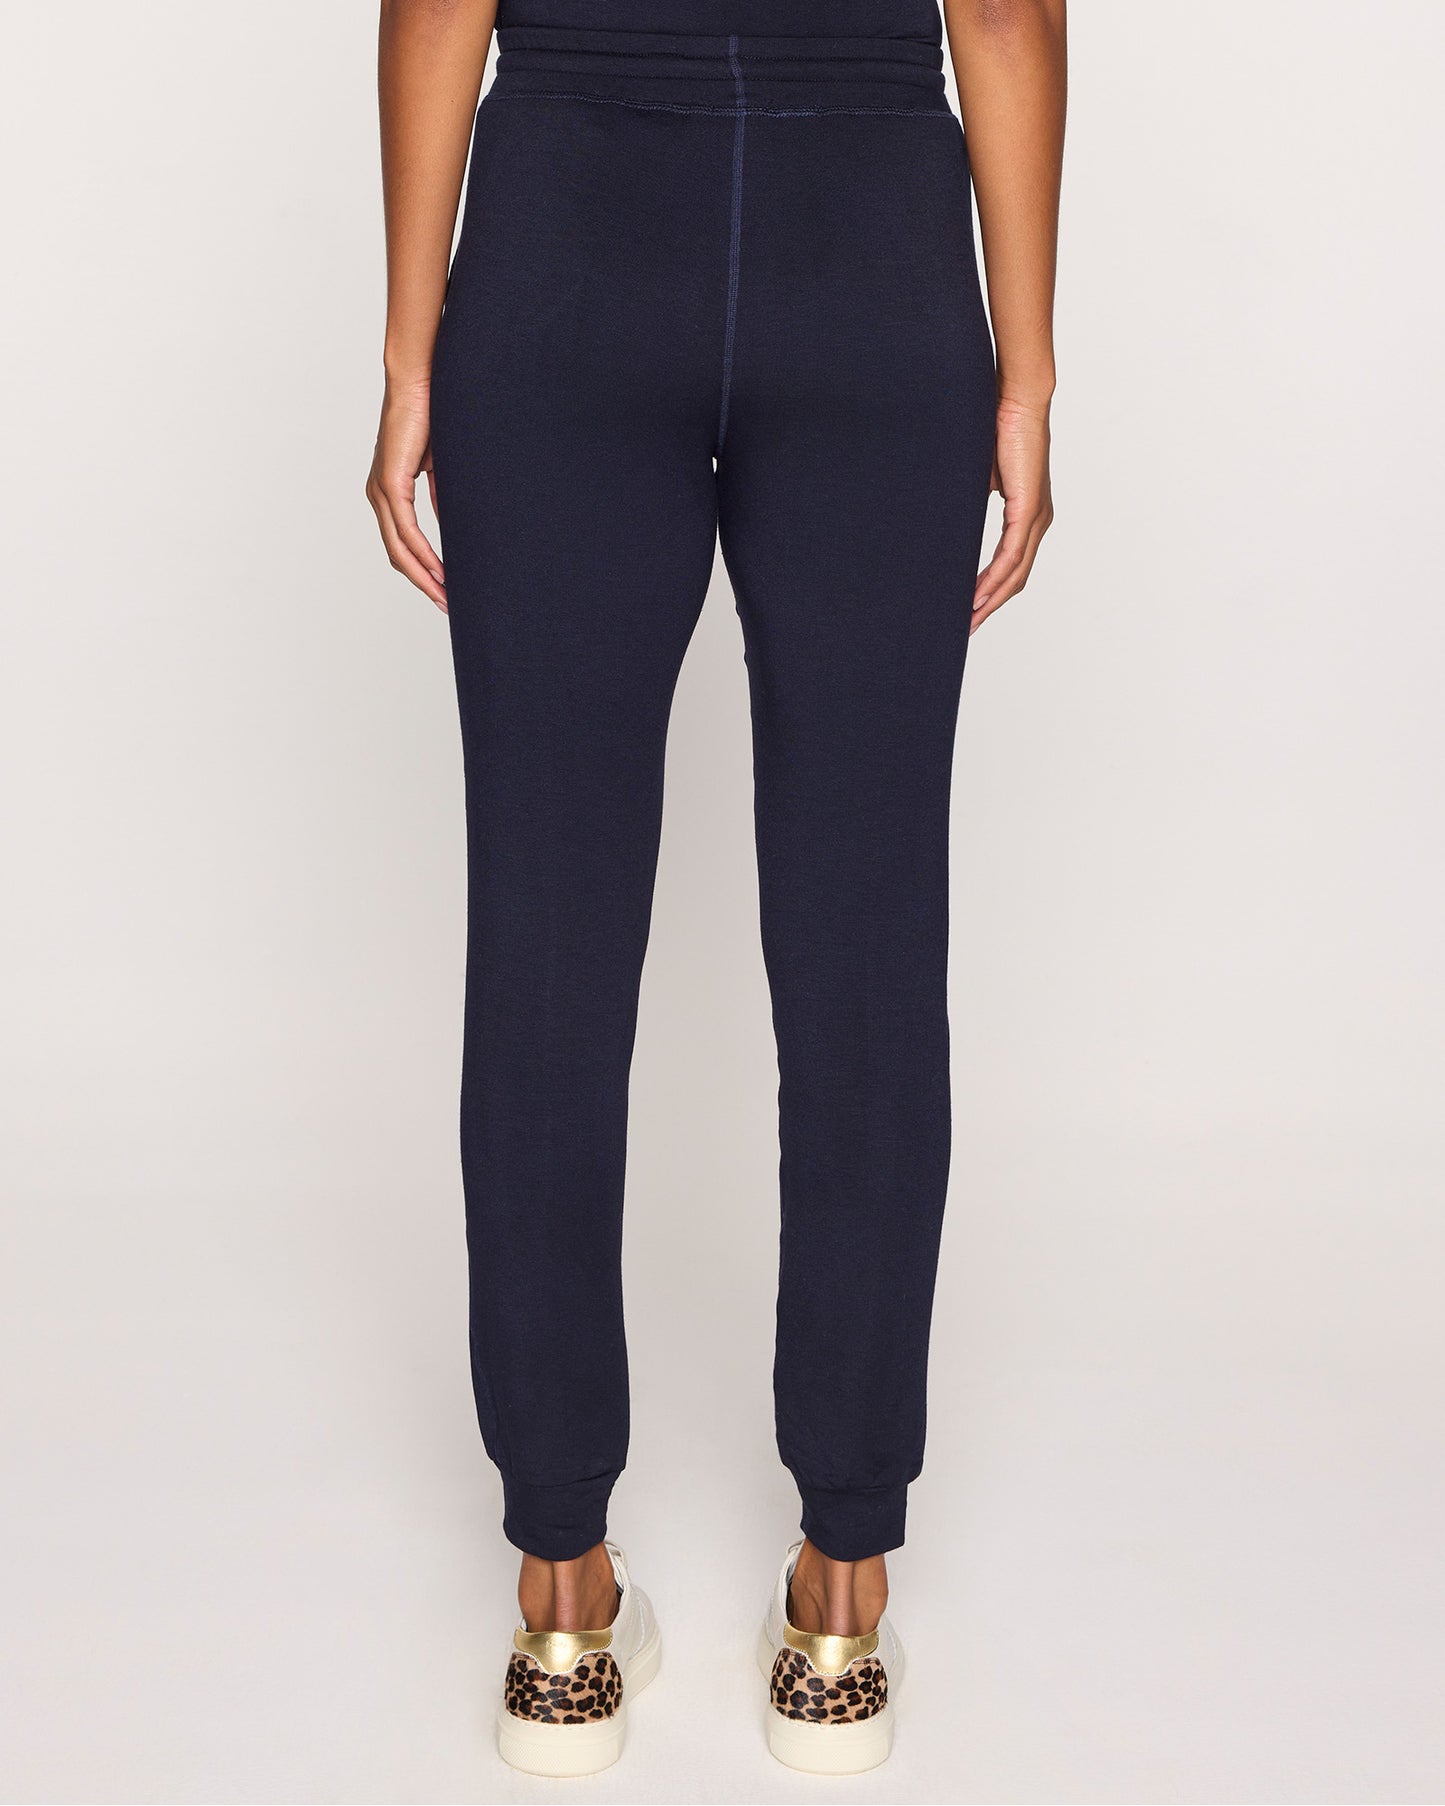 Navy | The Women's Elevated Jogger Back